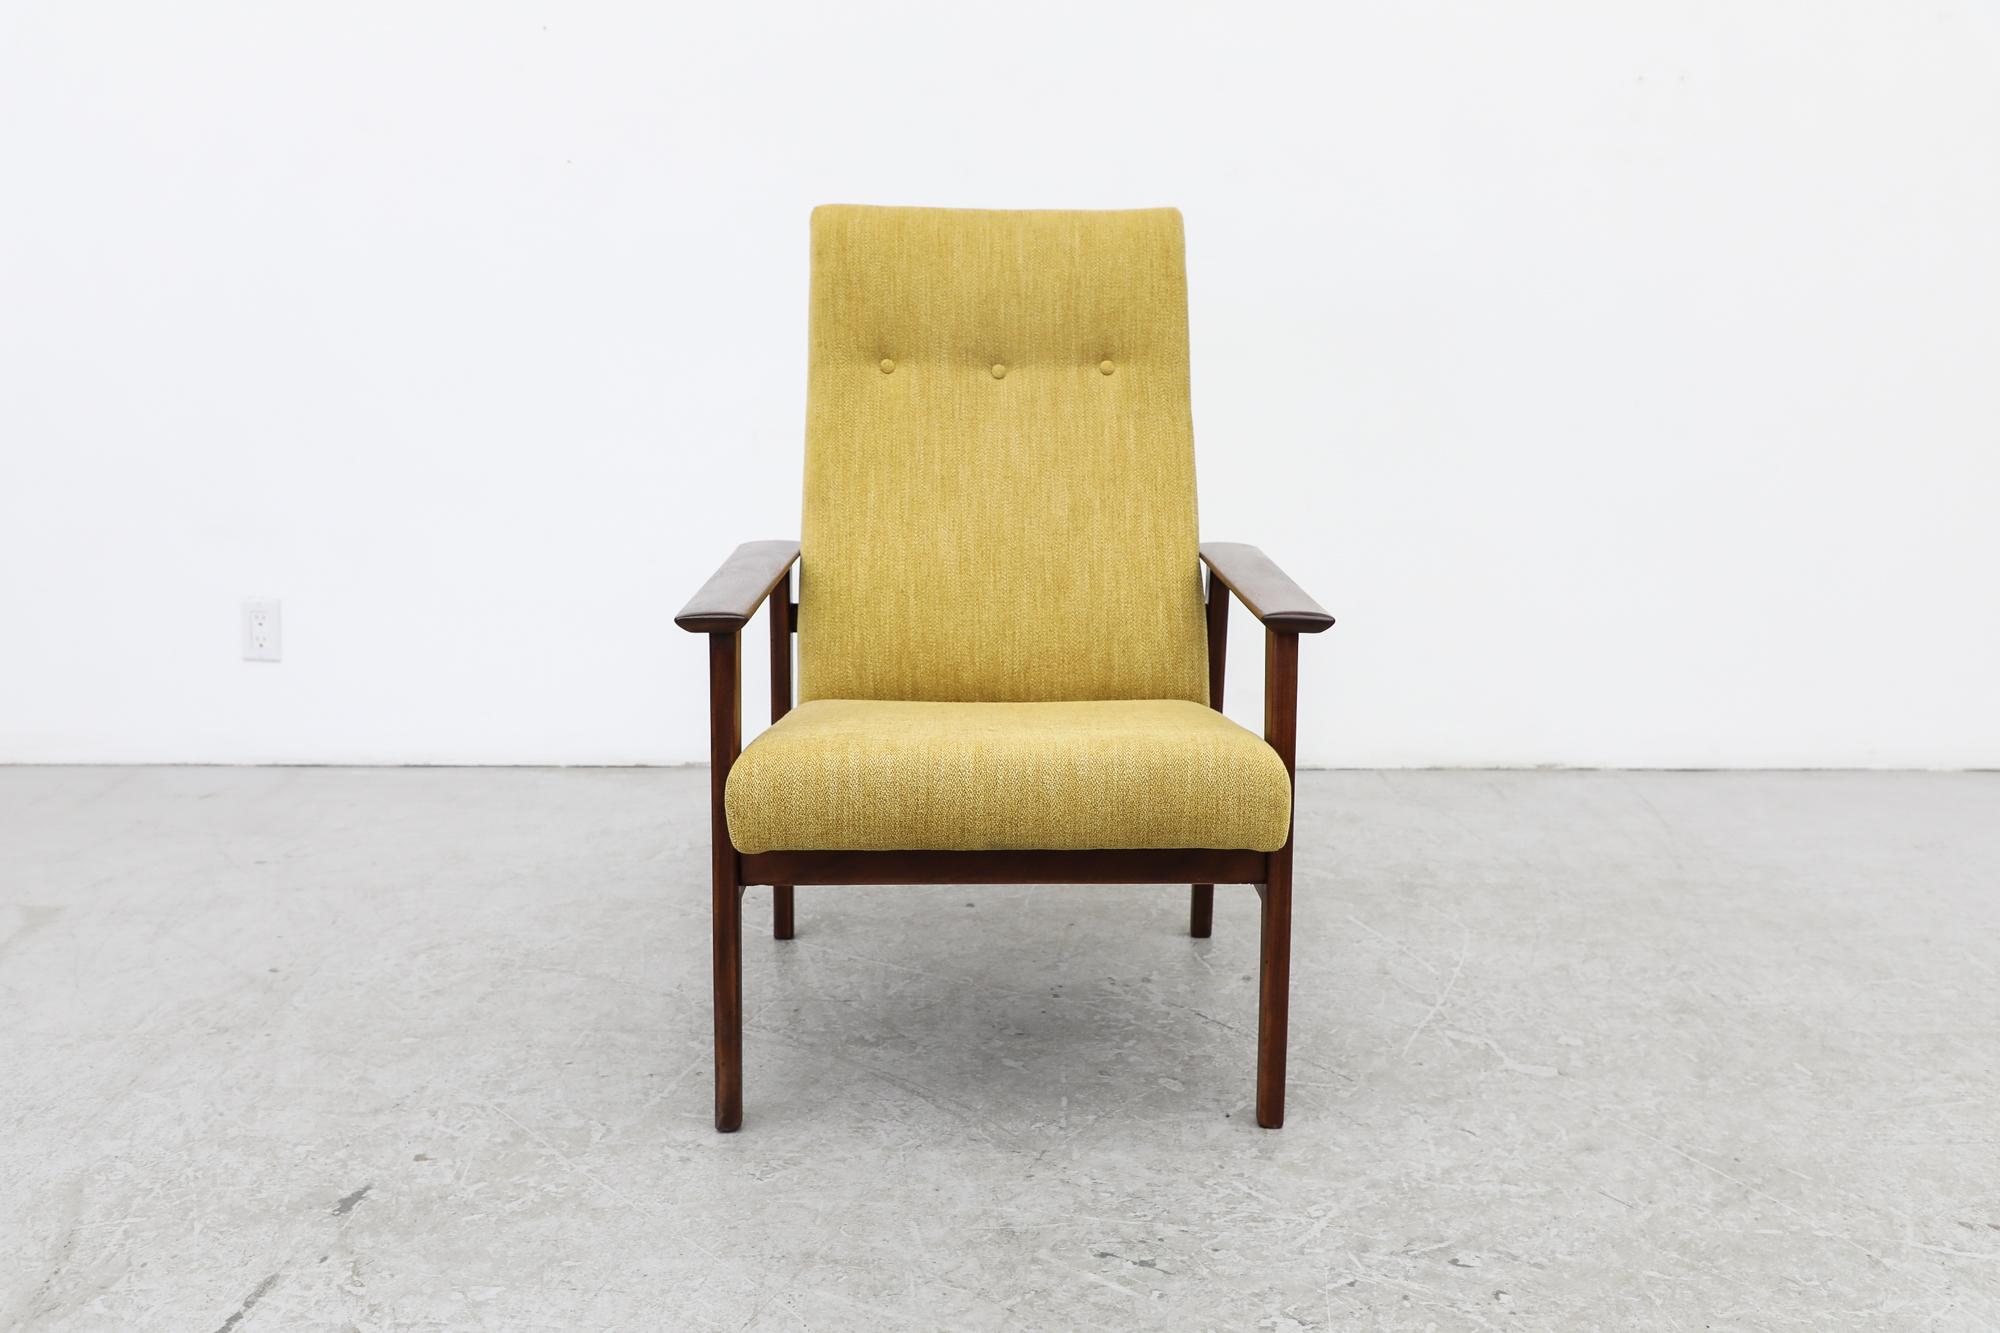 Mid-century Hans Wegner inspired Danish teak lounge chair with newer saffron upholstery. The solid teak frame is in original condition with normal signs of use including some scratches and scuffs. Wear is consistent with its age and use.